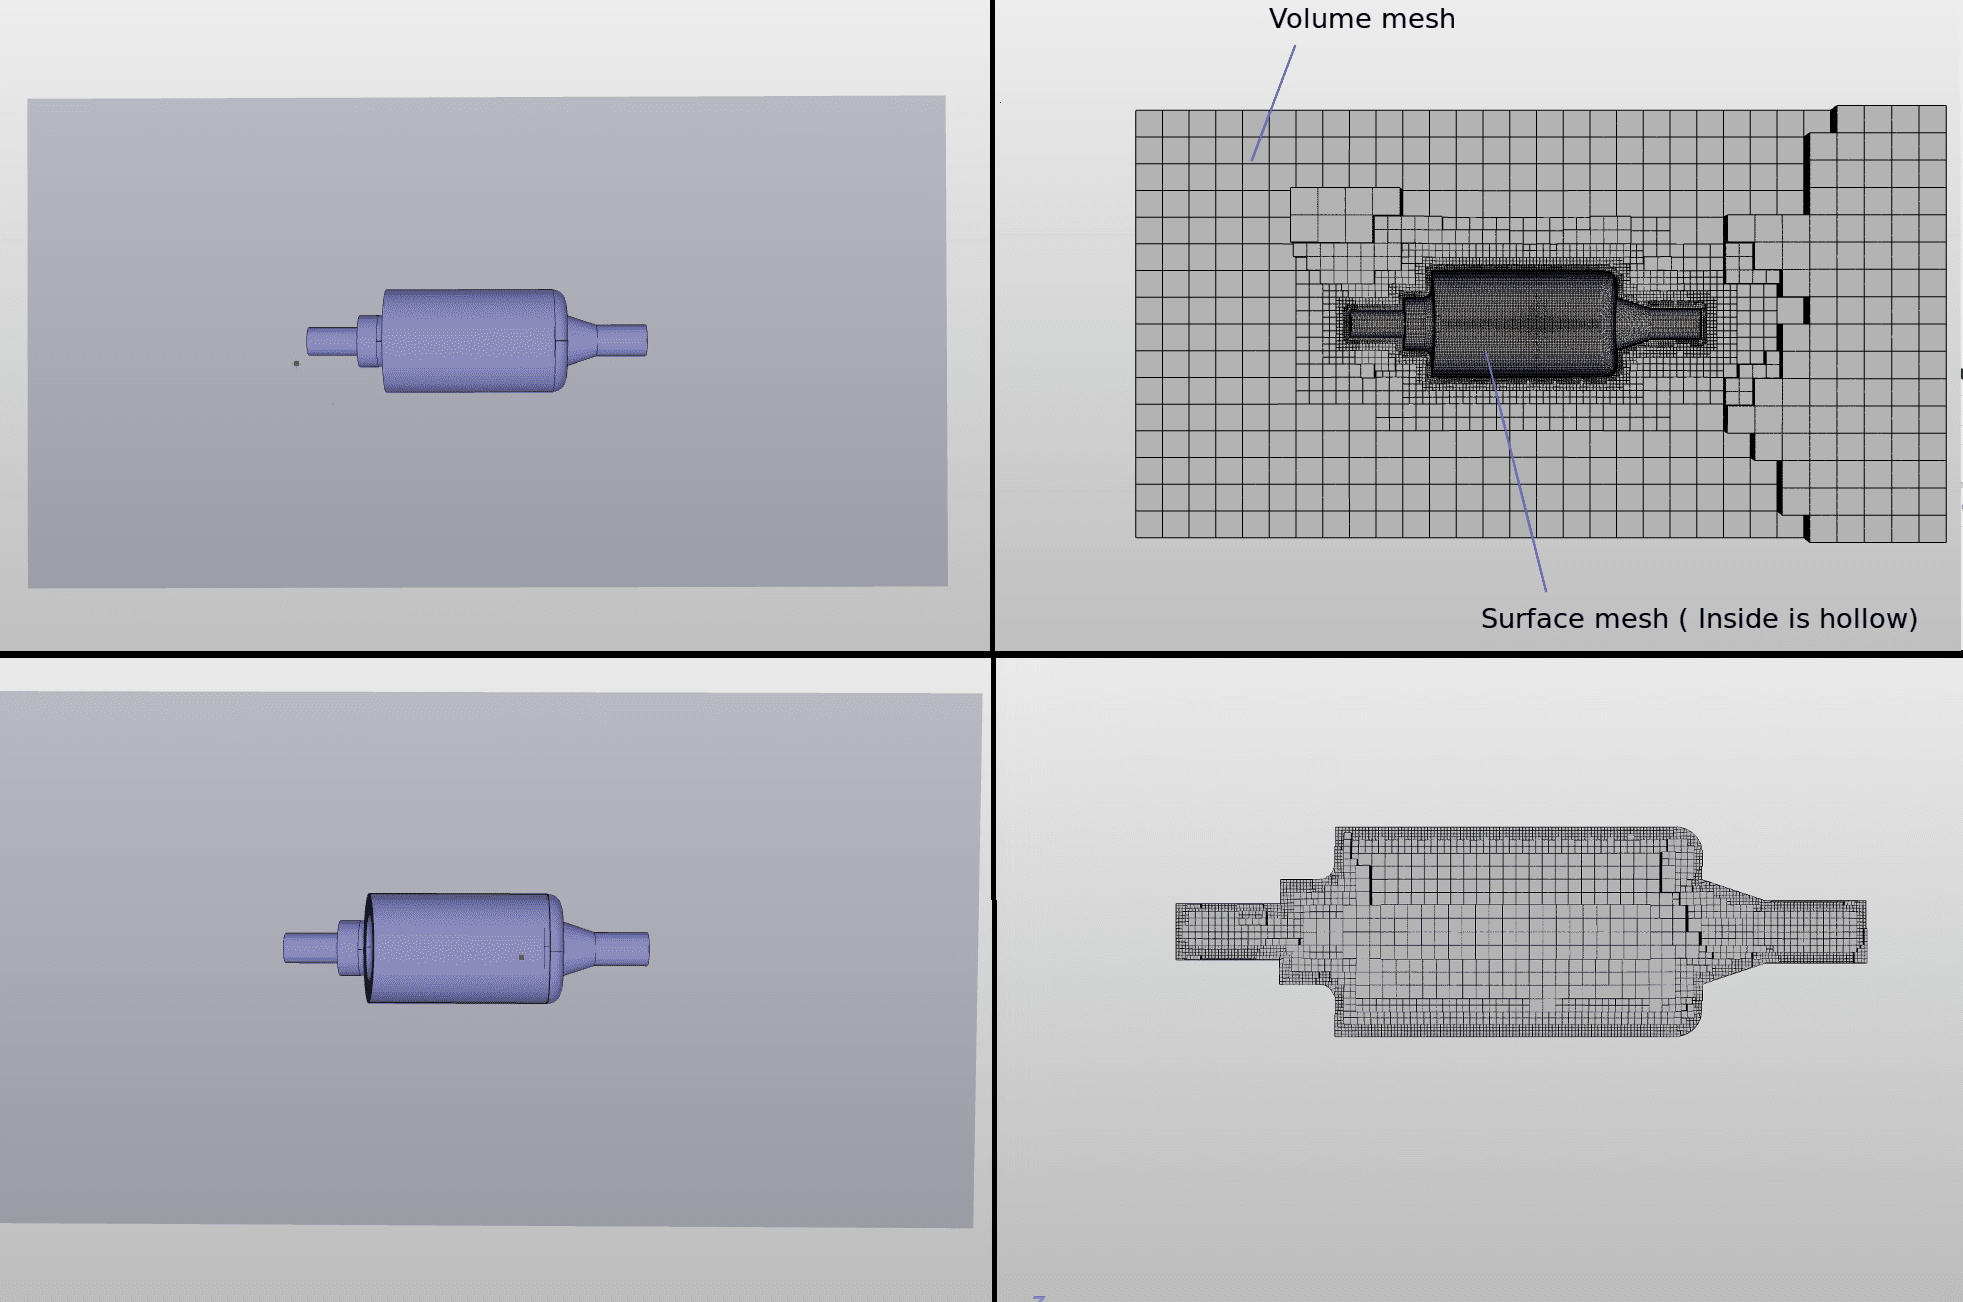 comparison of meshing results with material point inside or outside the cad geometry